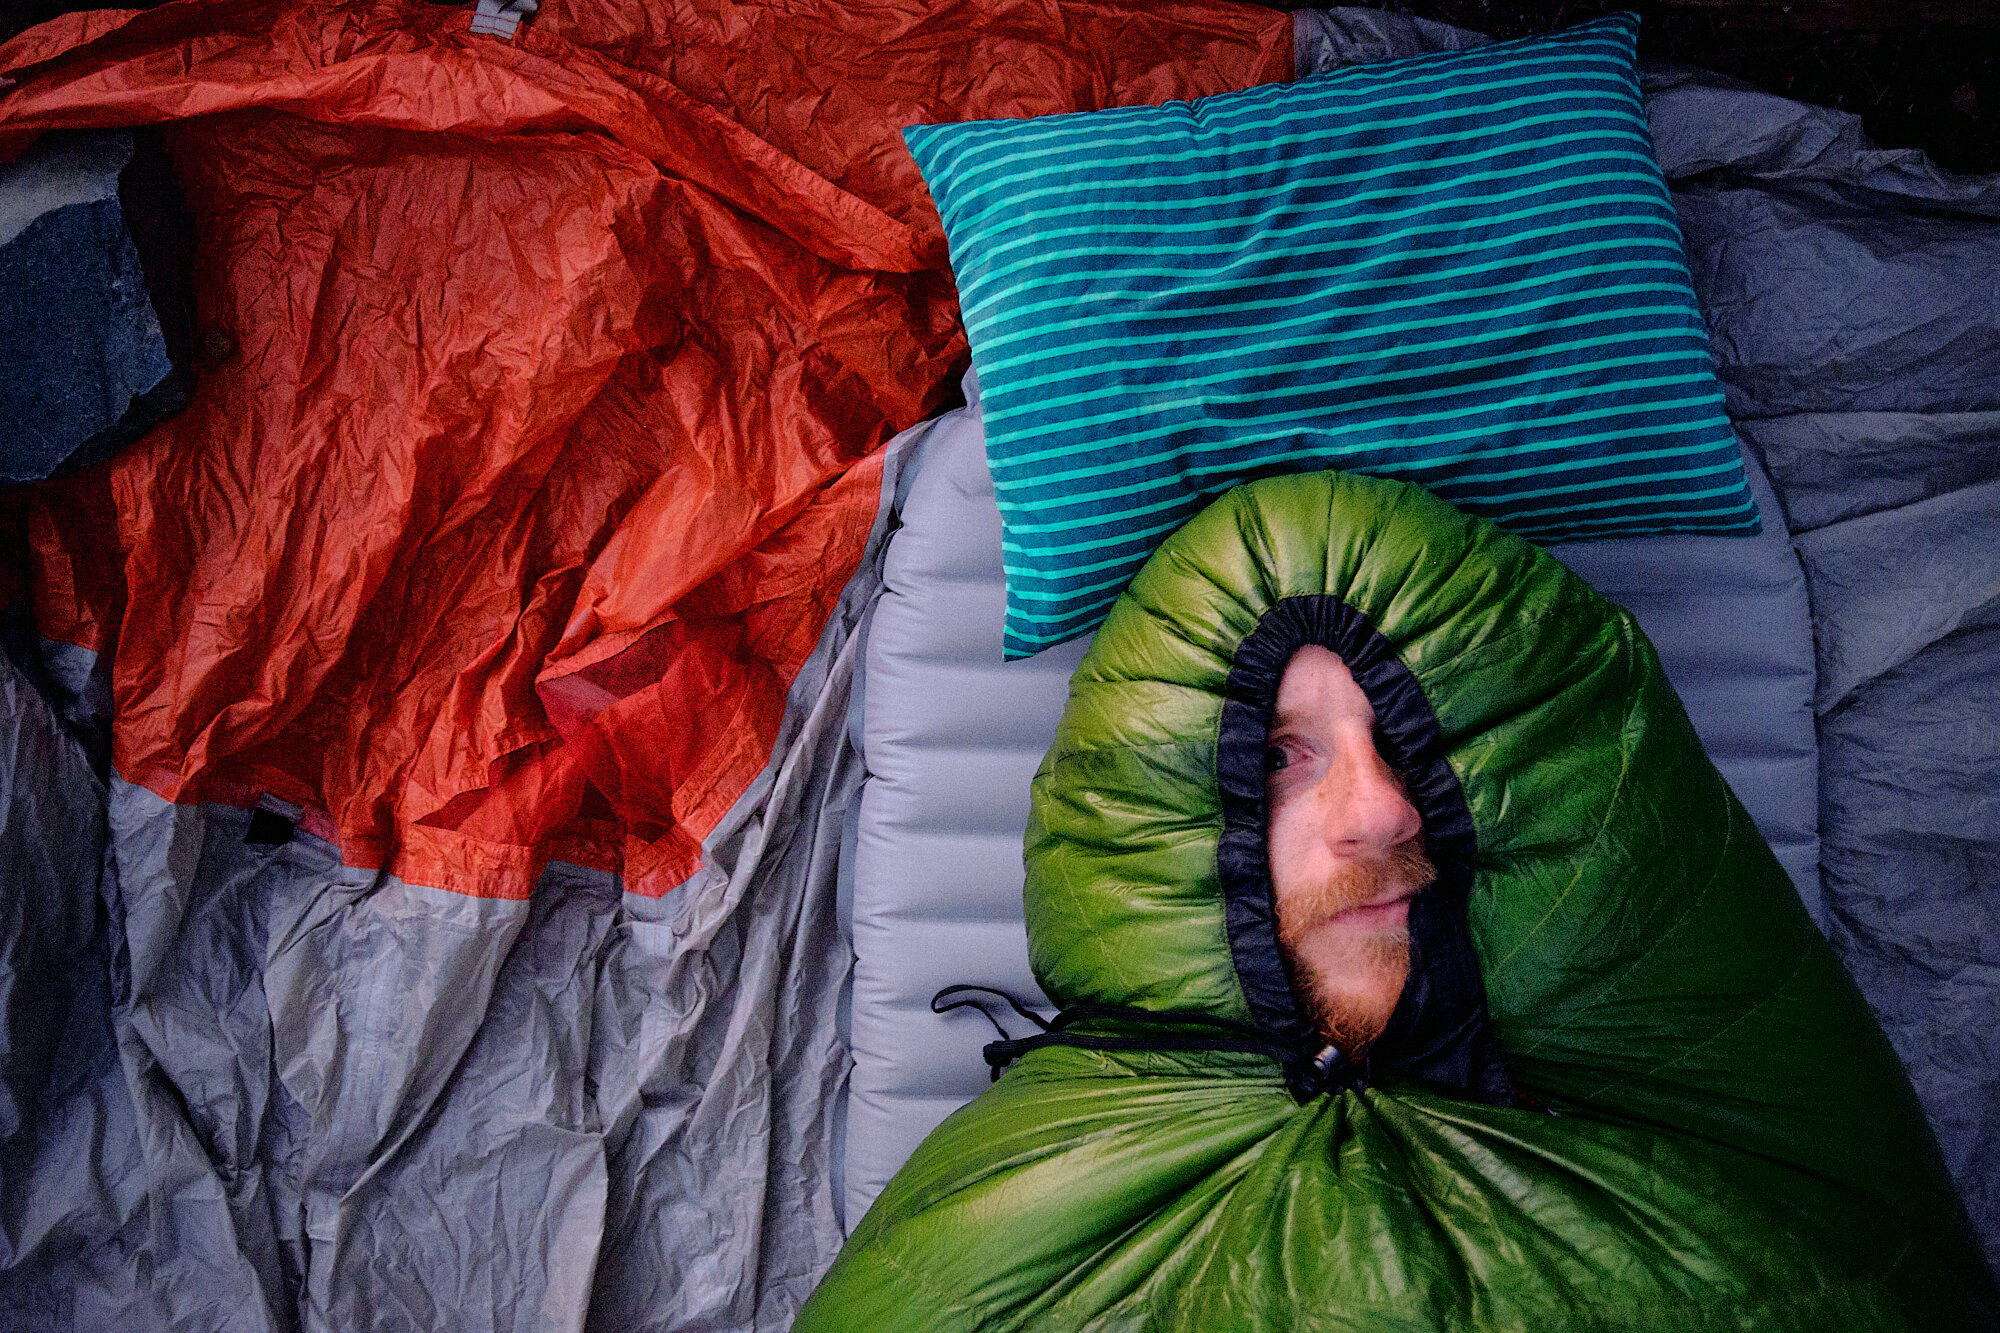  Lebowski quality controls some new cold-weather sleep gear before bed. | 6/19/19 Mile 716.5, 7,832' 